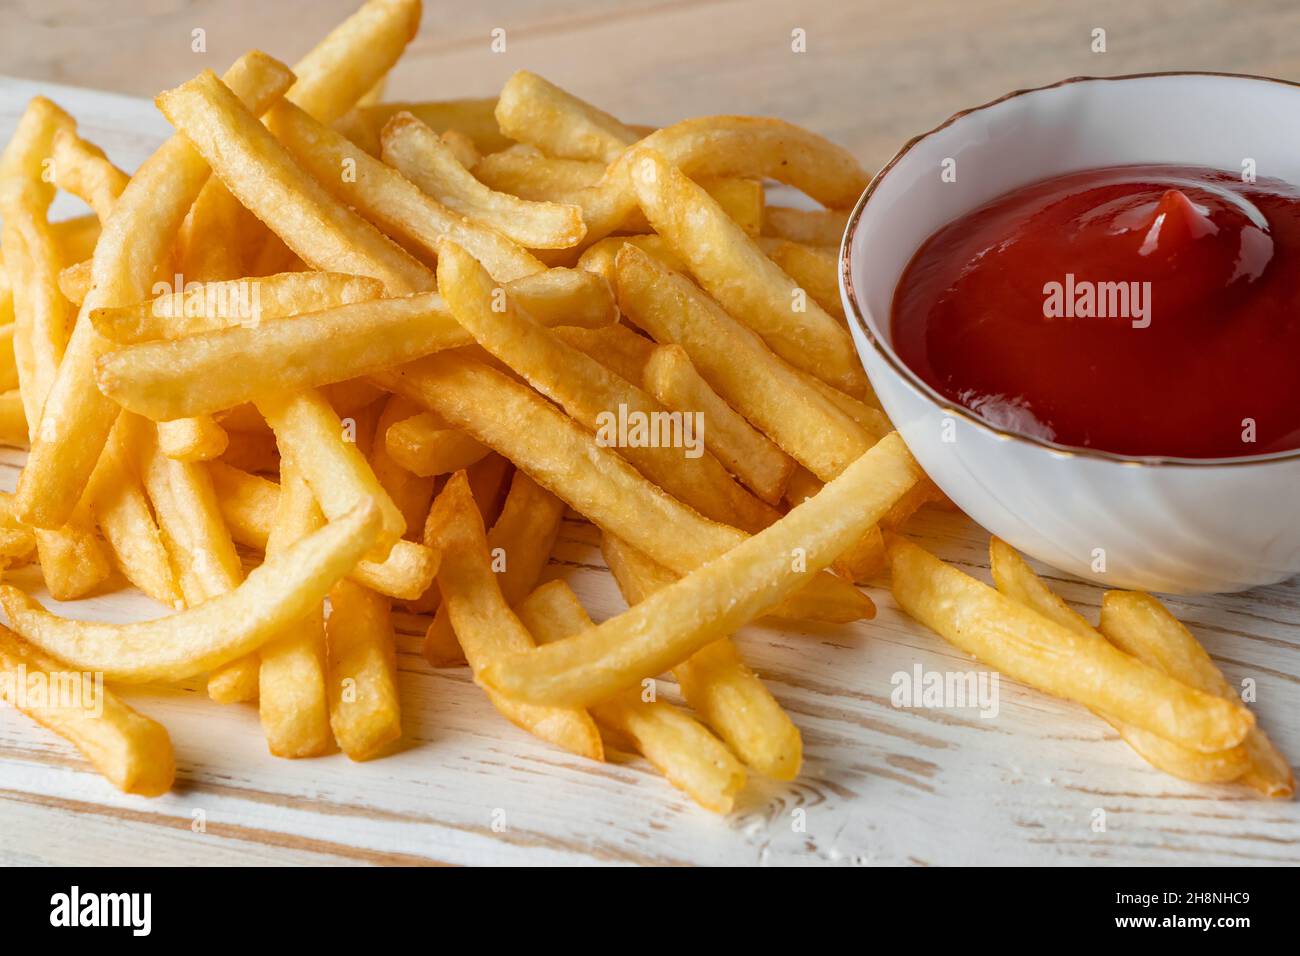 Hot golden french fries with sauce on a wooden background. Homemade rustic food. Stock Photo